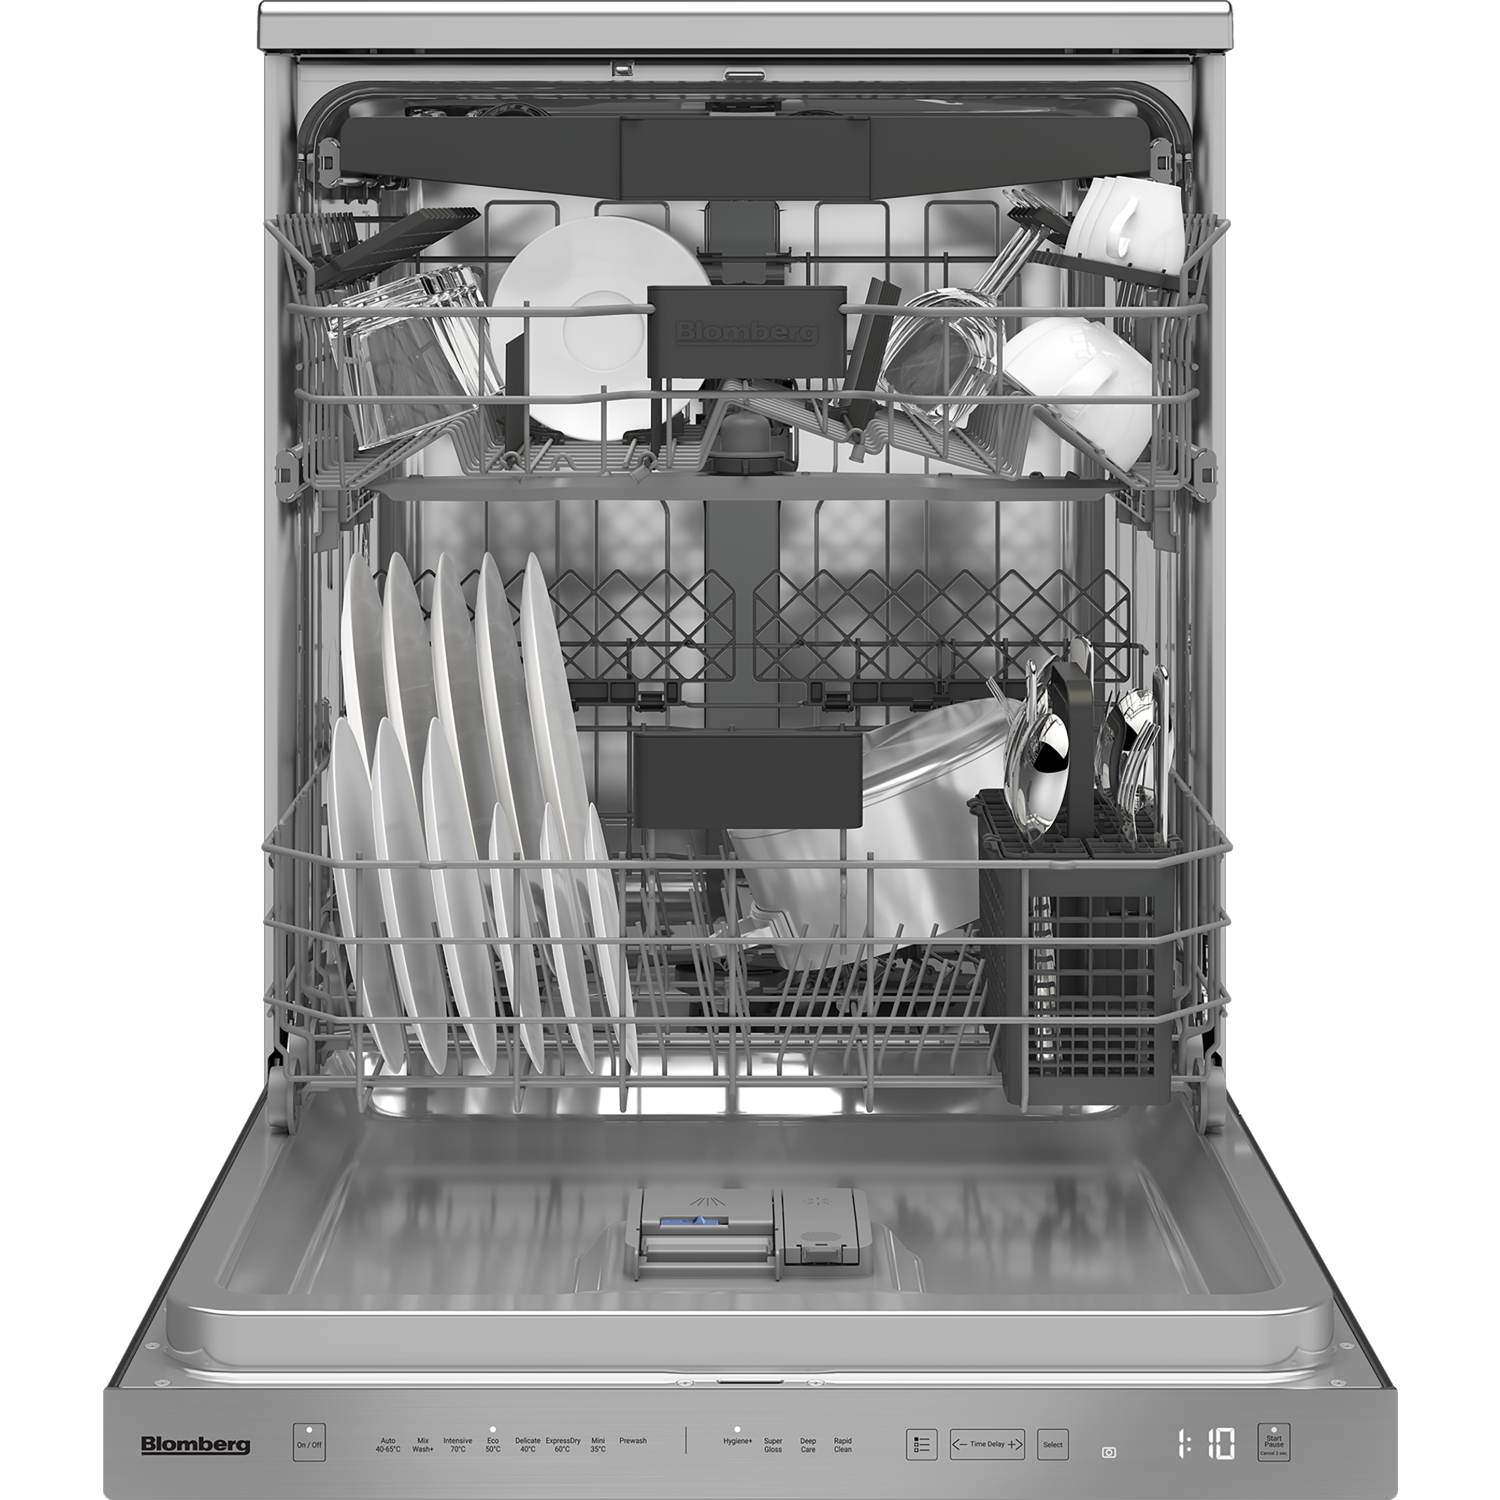 Blomberg LDF63440X Full Size Dishwasher - Stainless Steel - 16 Place Settings - 4